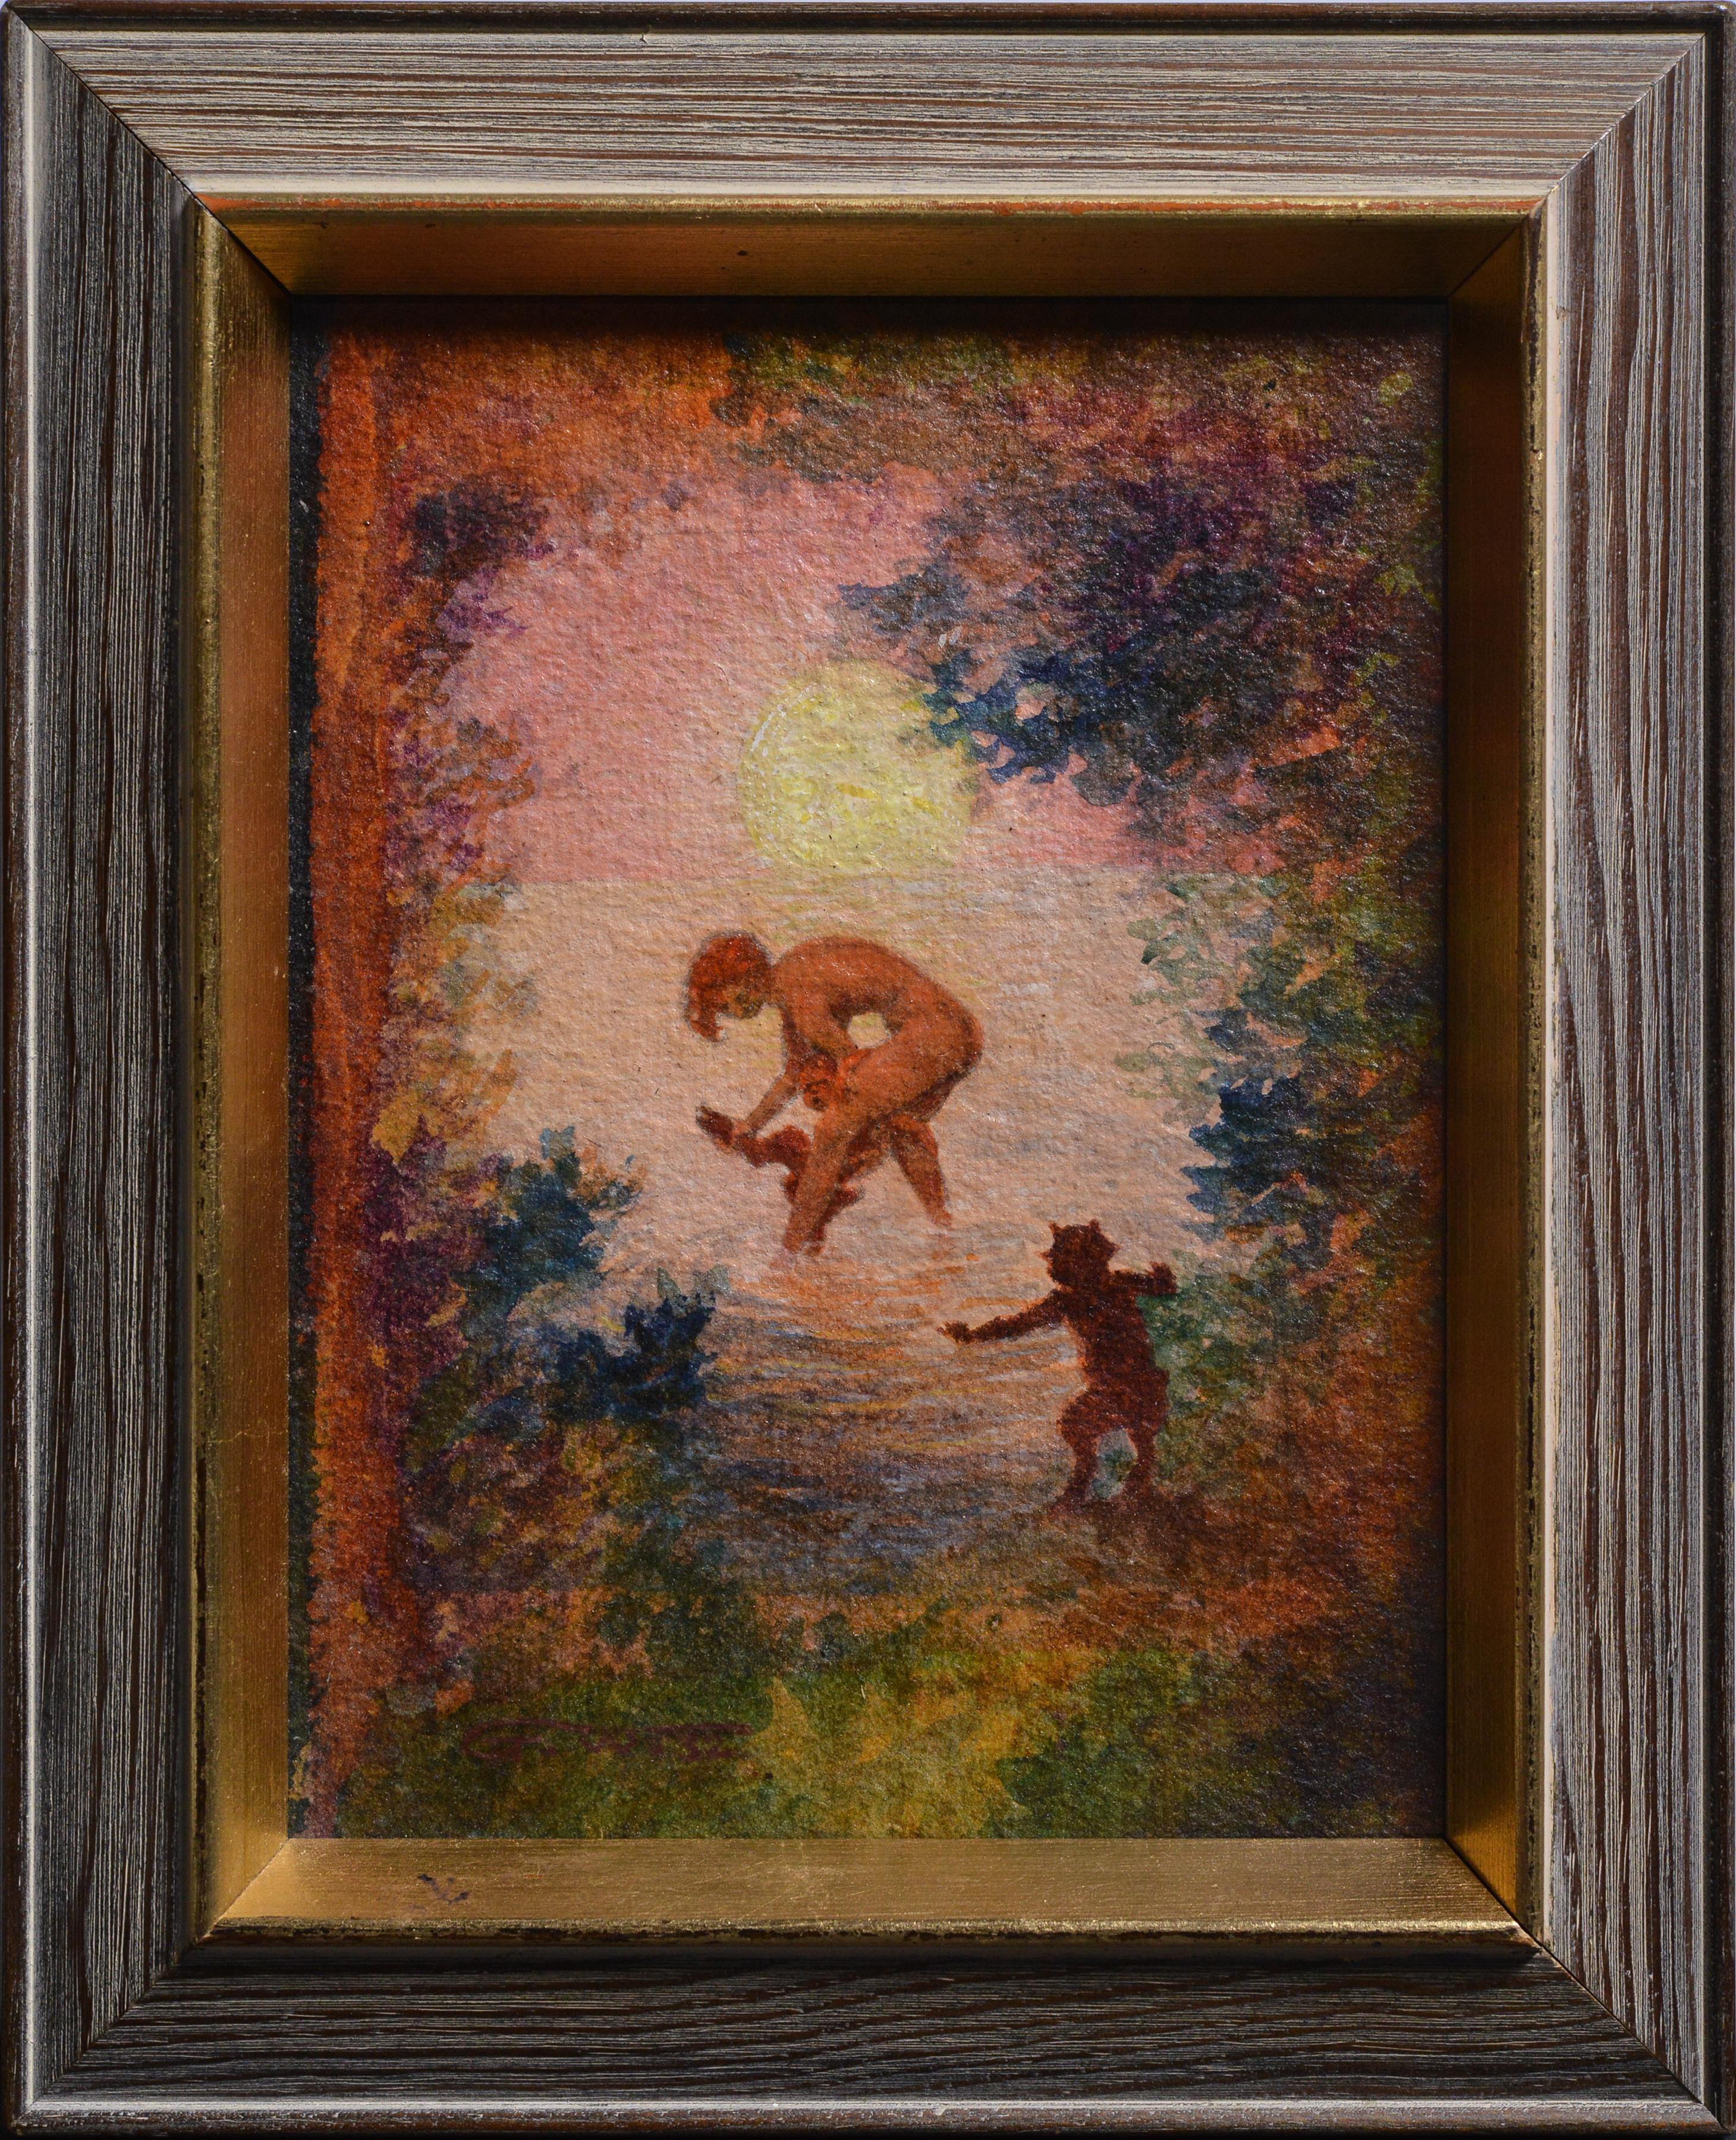 Ernst Gunnar Widholm Figurative Painting - Bacchante Bathes Faun Childrens at Sunset 1932 Swedish Oil Painting